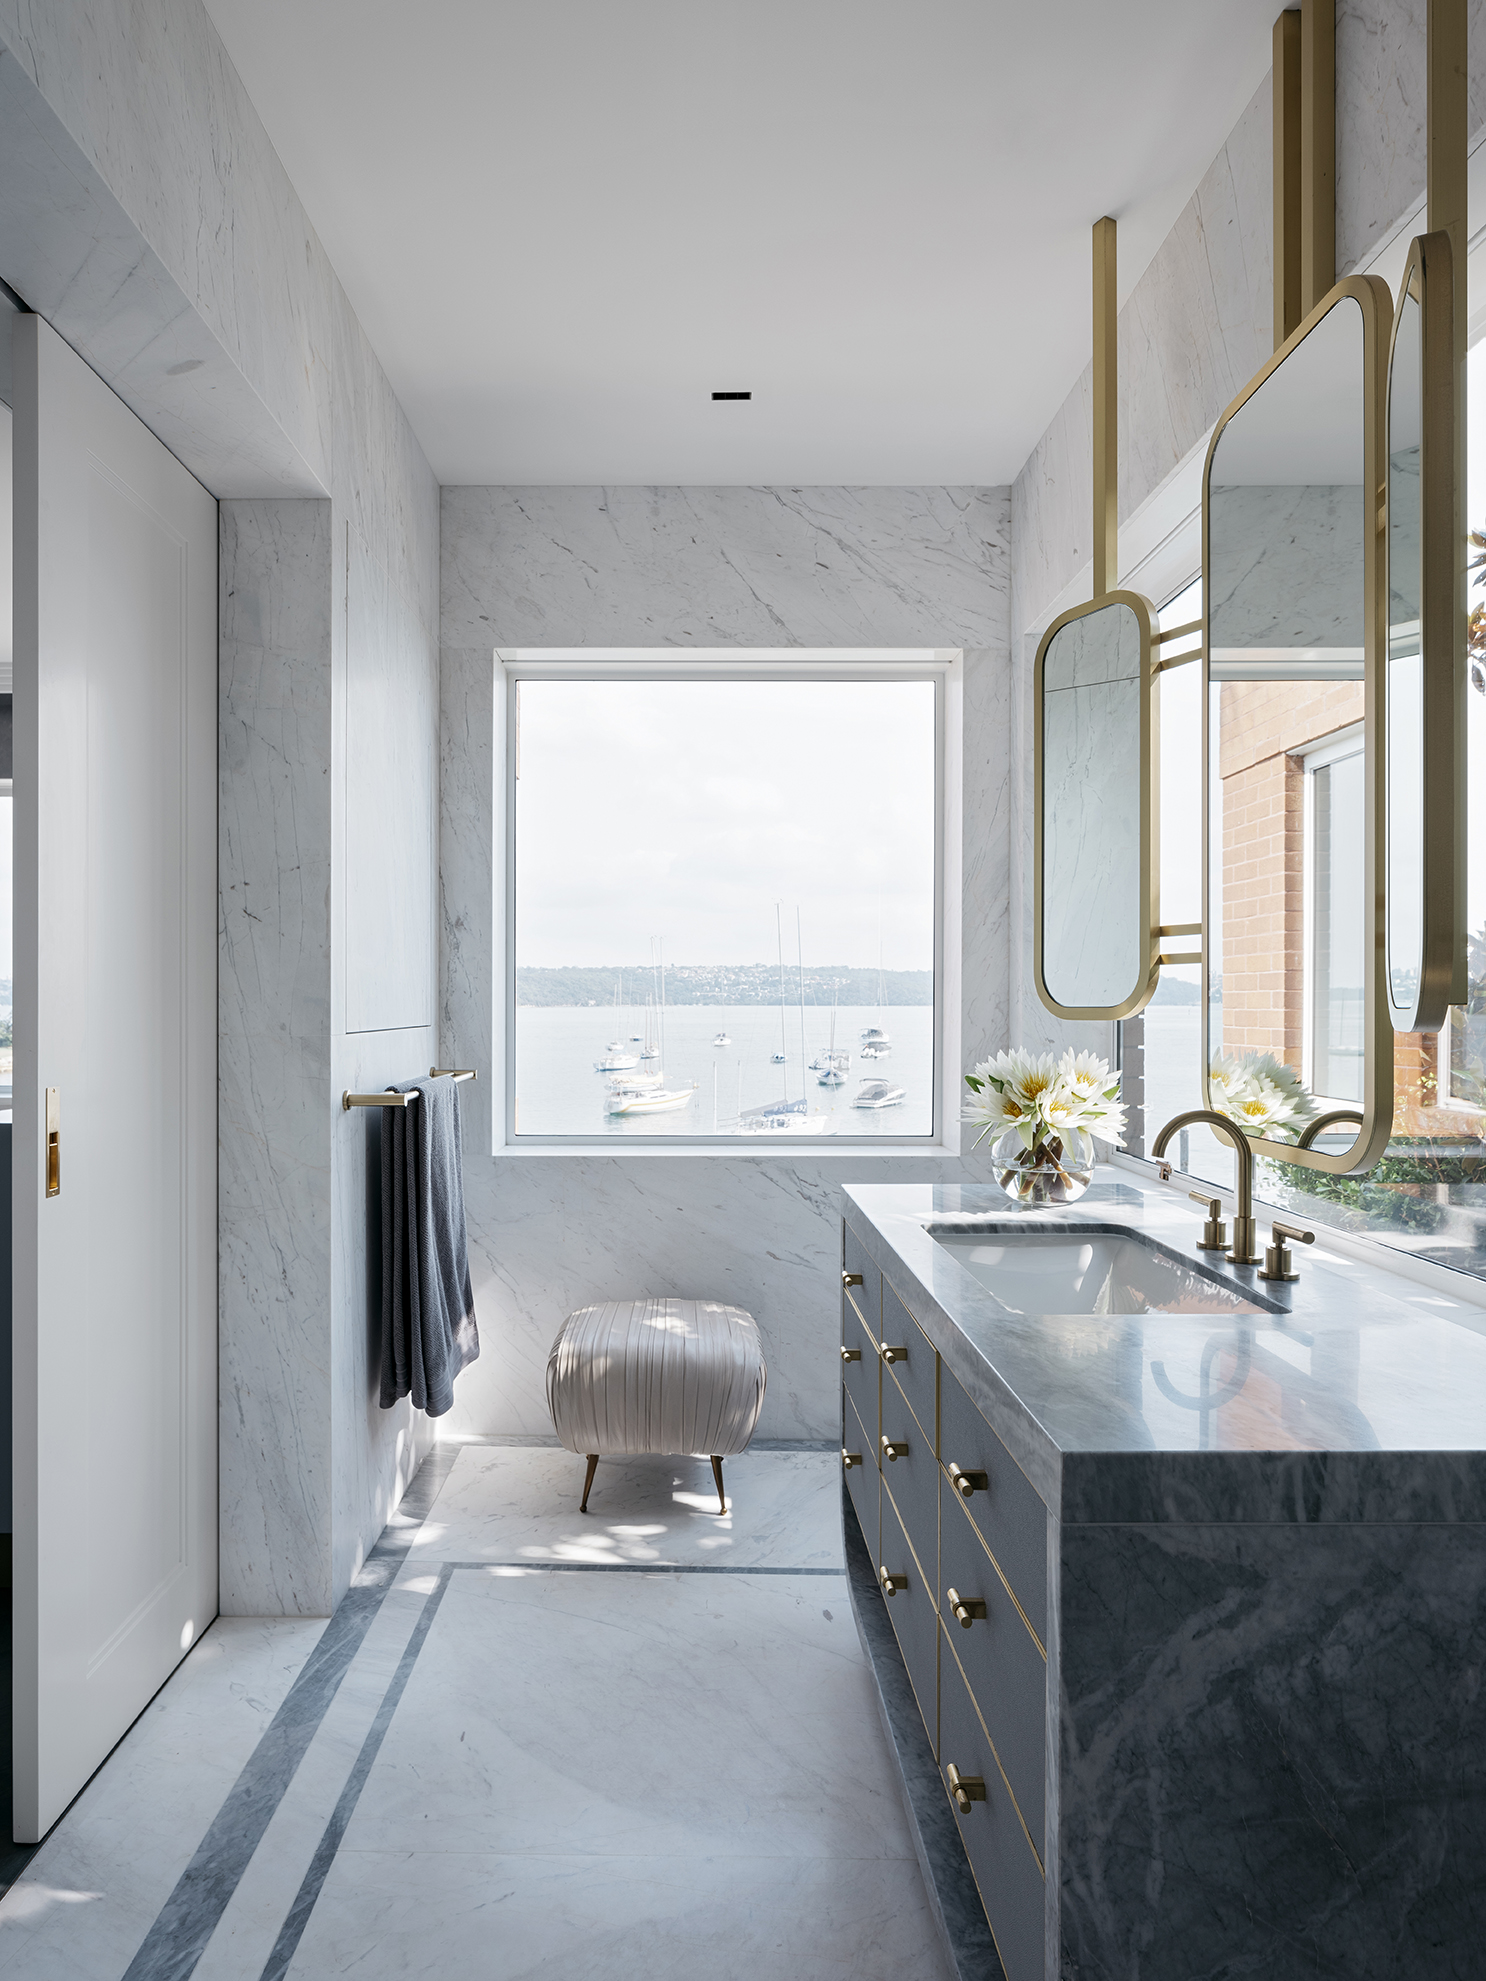 Art deco style bathroom renovation with marble vanity and floating mirrors, by Sydney interior designers, Brendan Wong Design